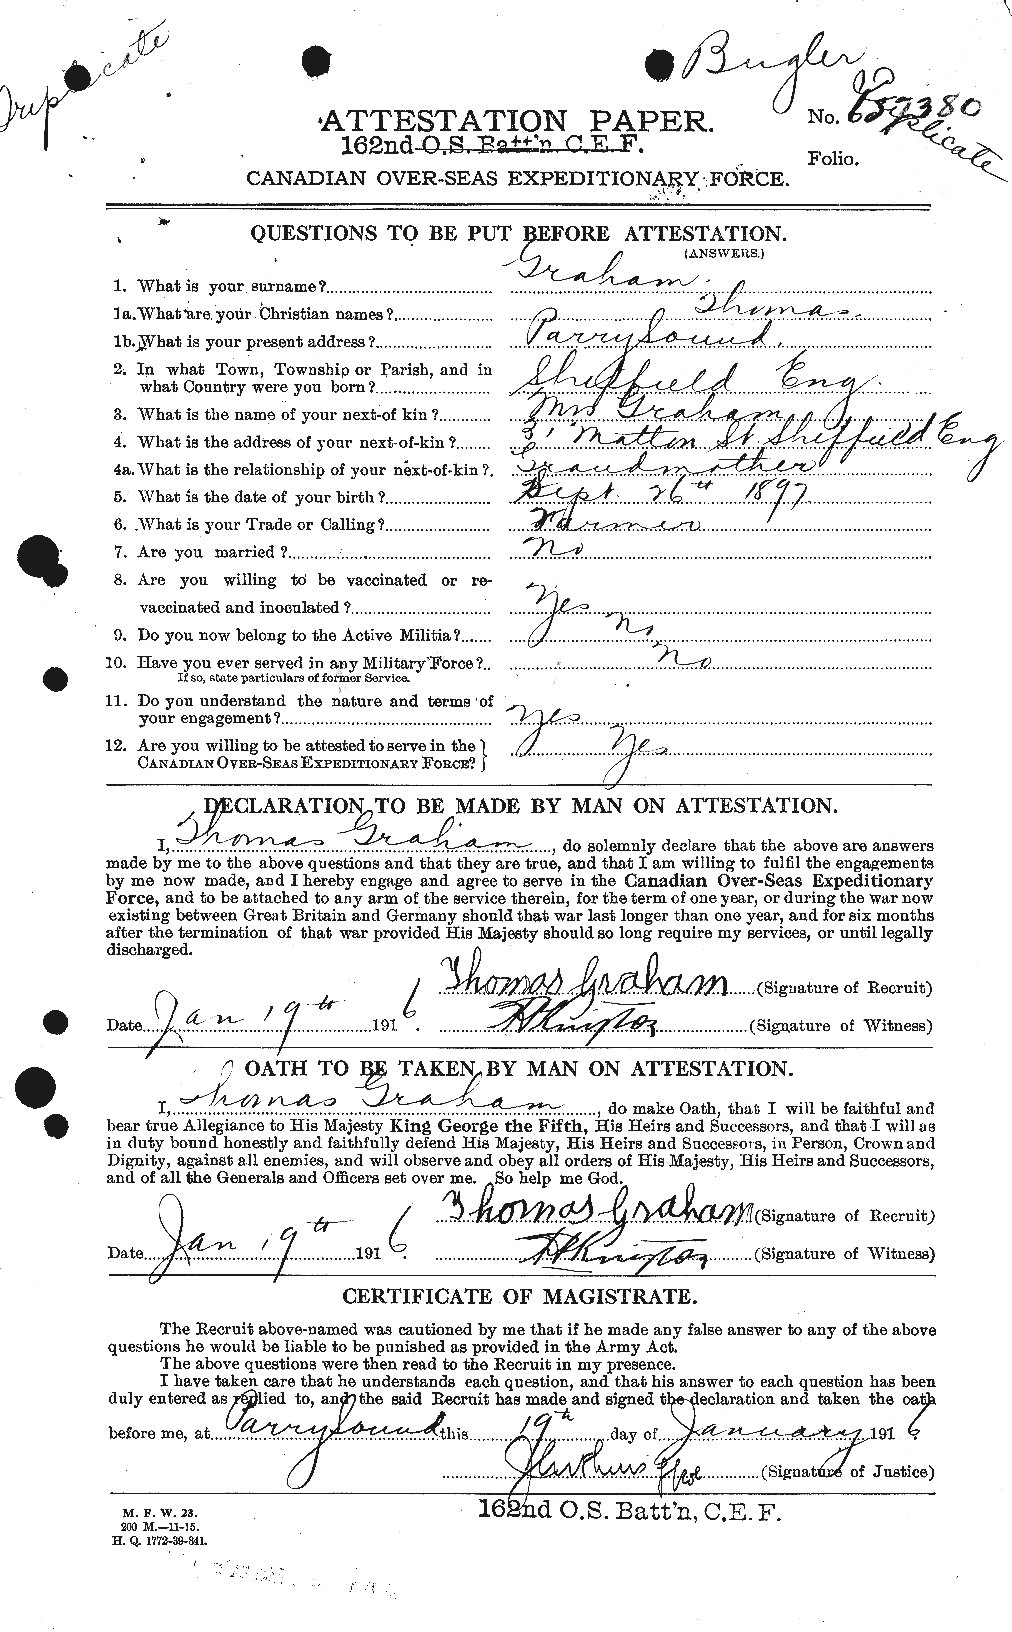 Personnel Records of the First World War - CEF 359482a